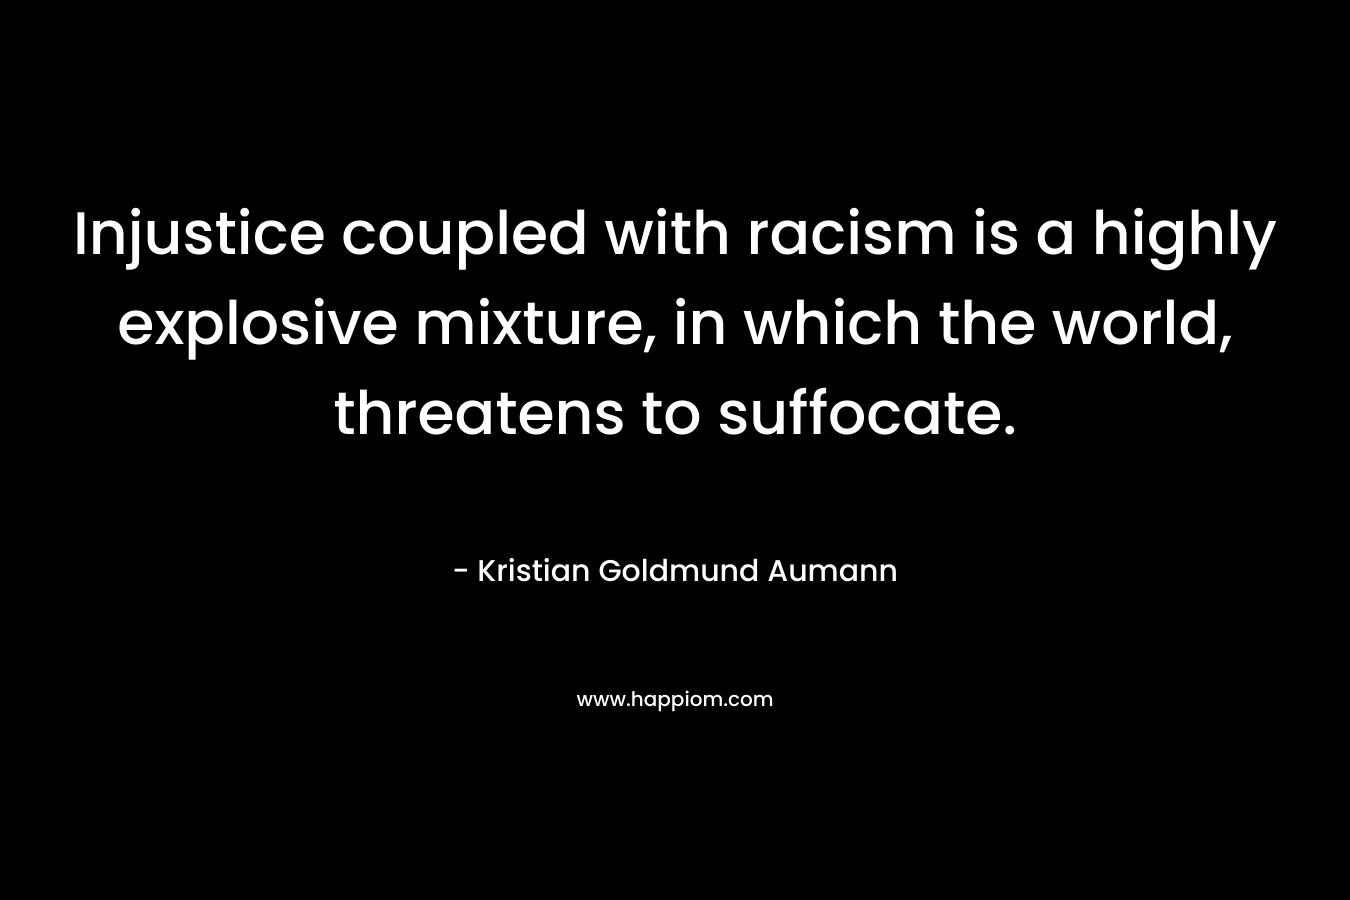 Injustice coupled with racism is a highly explosive mixture, in which the world, threatens to suffocate. – Kristian Goldmund Aumann